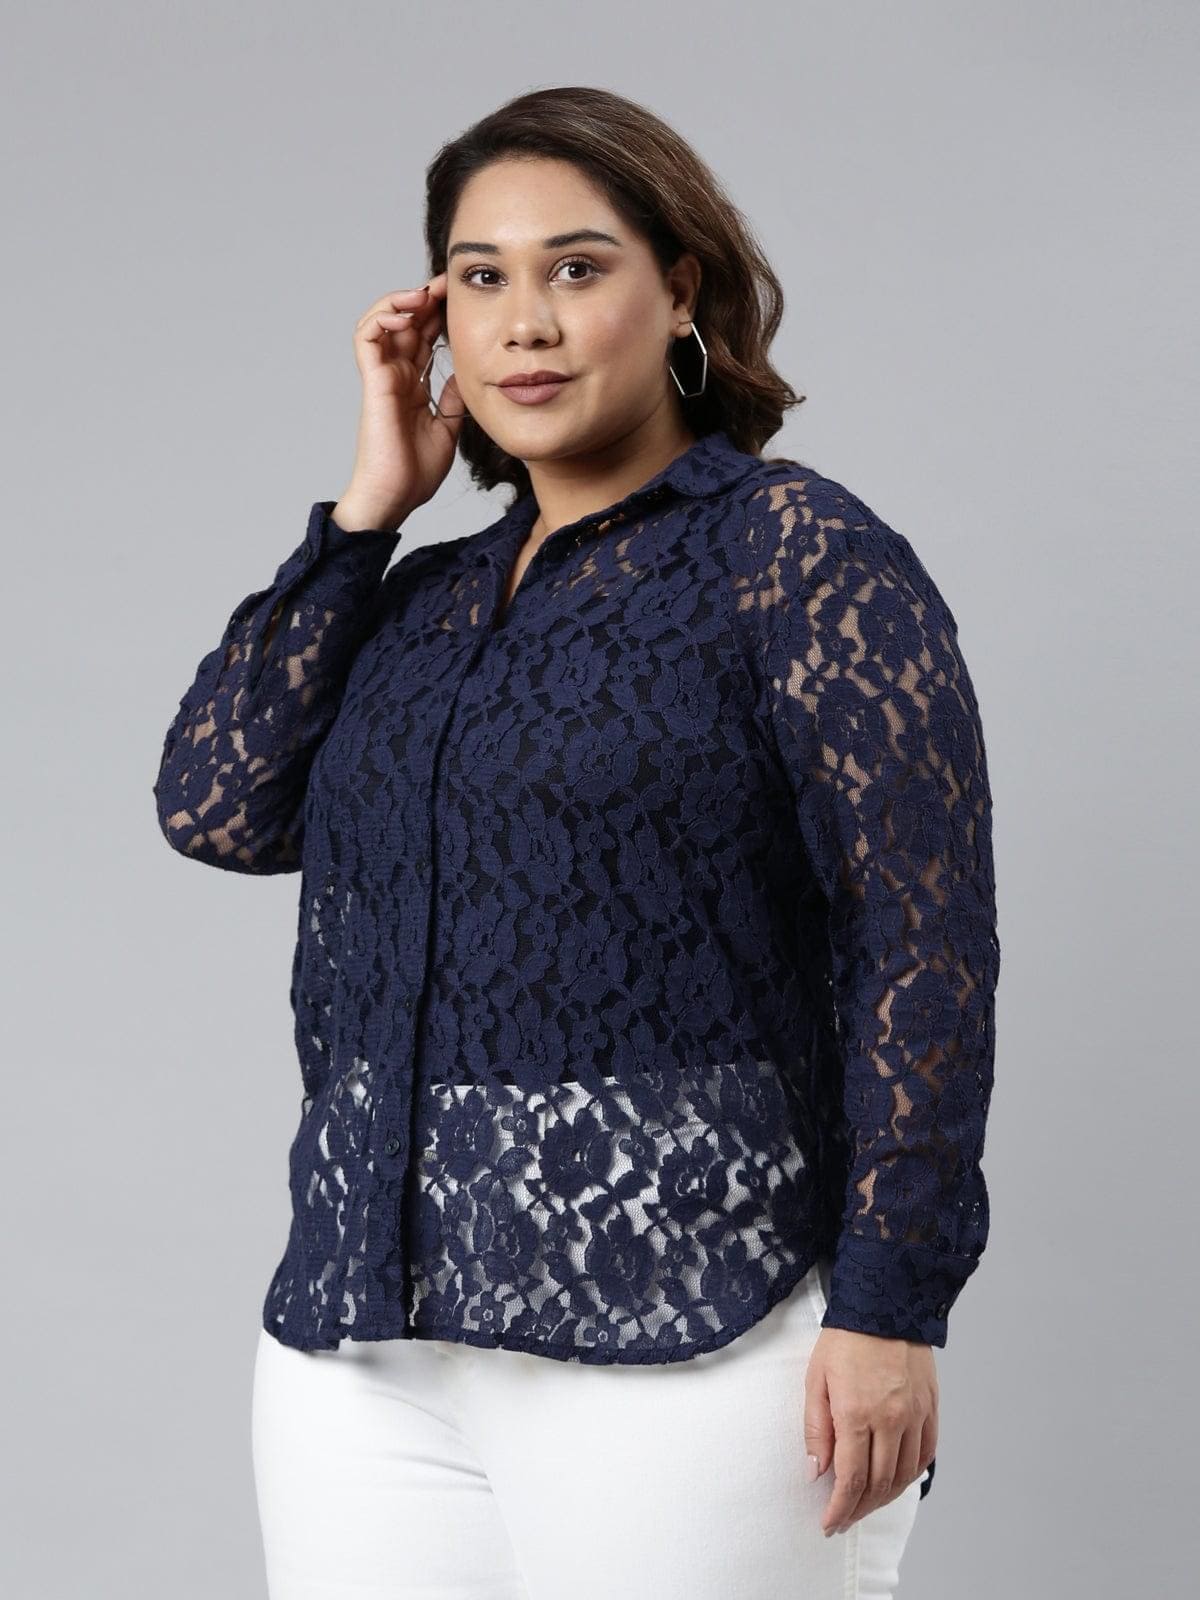 Blue lace shirt with Pointed collar